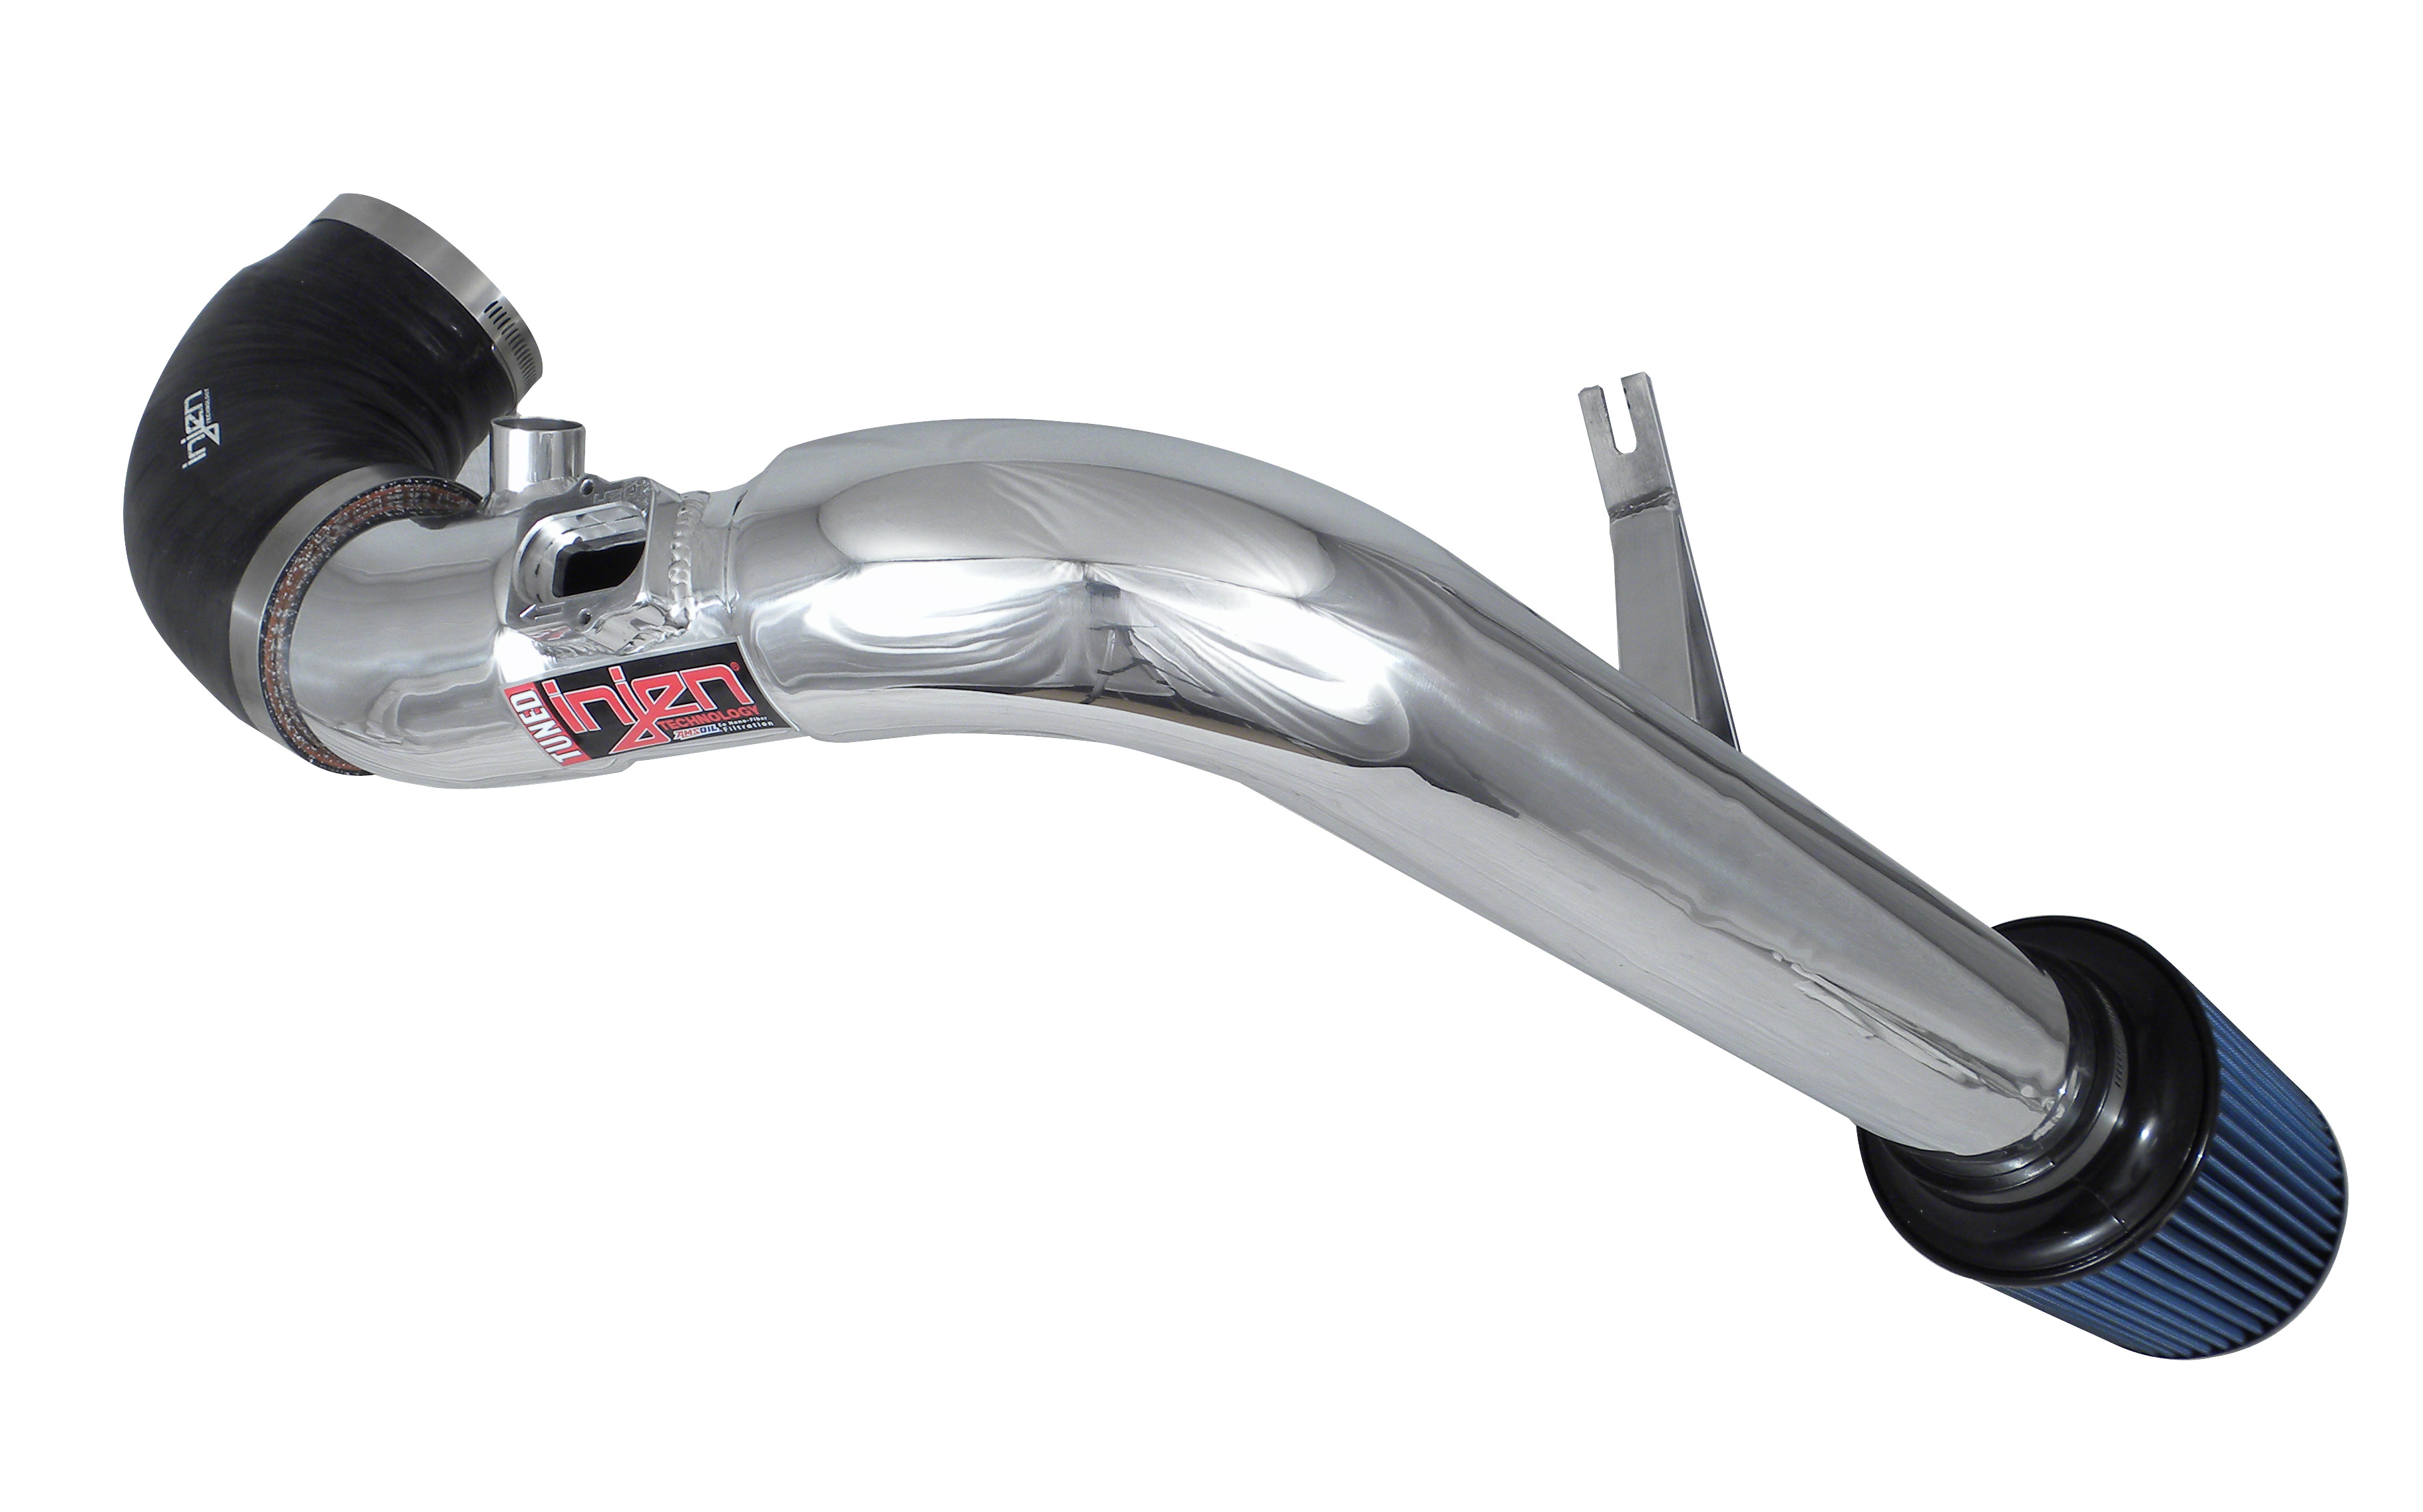 Injen 2009-10 Camaro Polished Power-Flow Cold Air Intake System - Click Image to Close